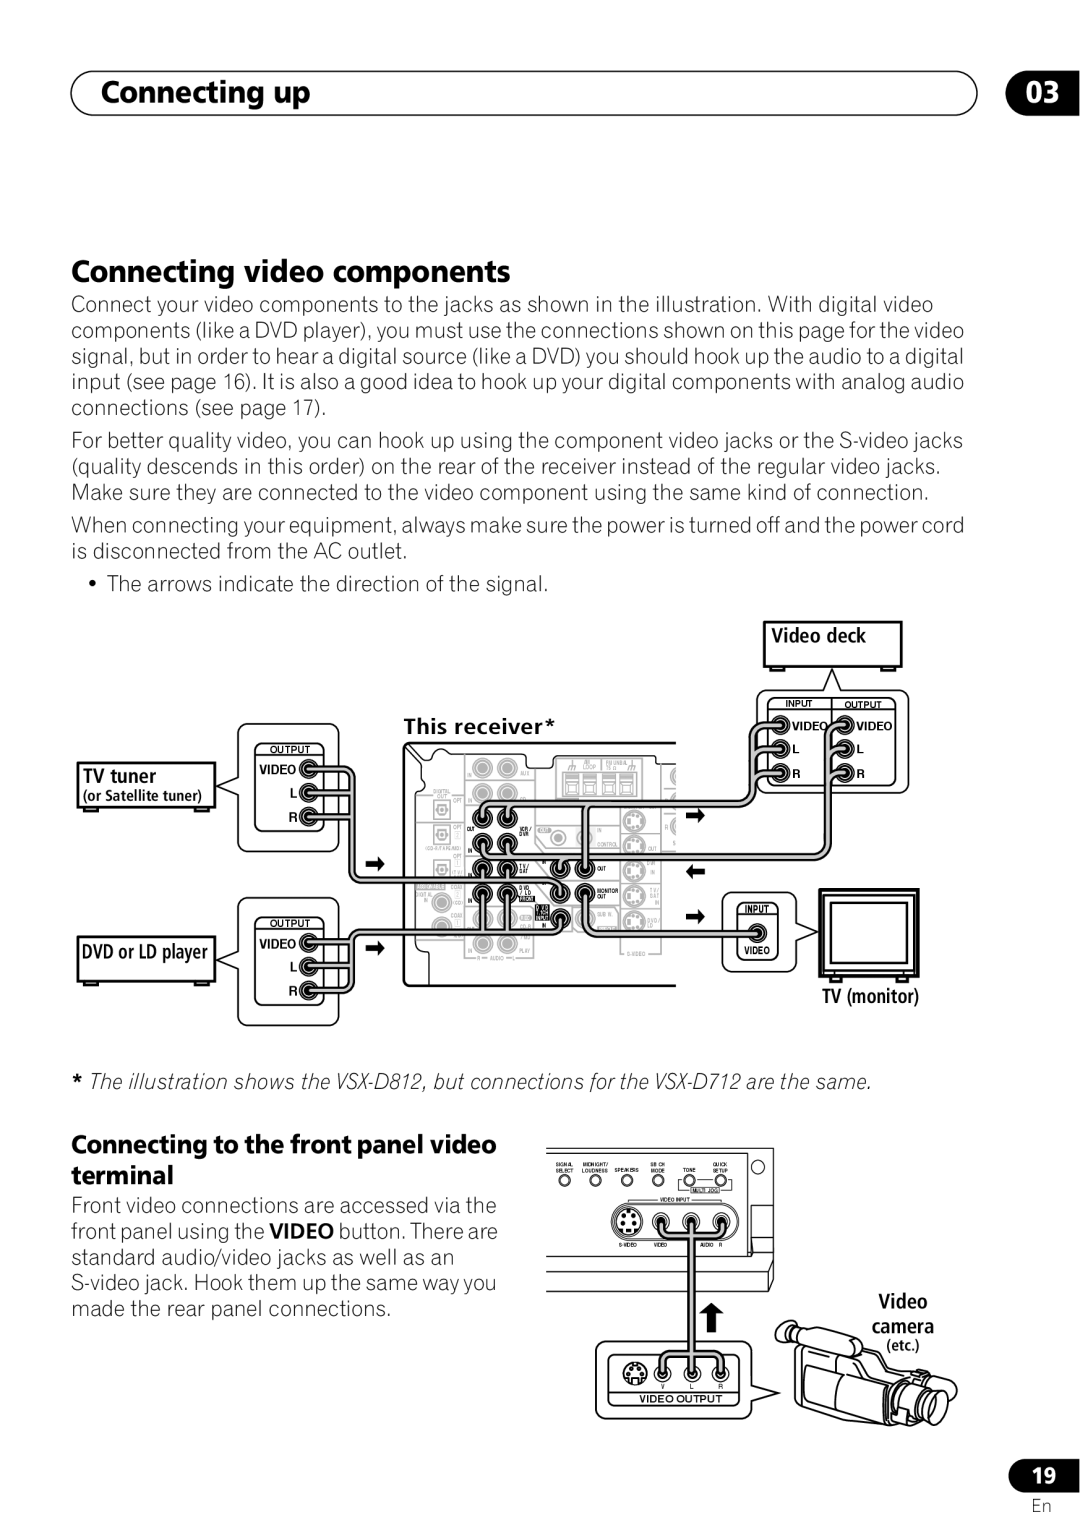 Pioneer VSX-D712 Connecting video components, Connecting to the front panel video, terminal, Connecting up, This receiver 